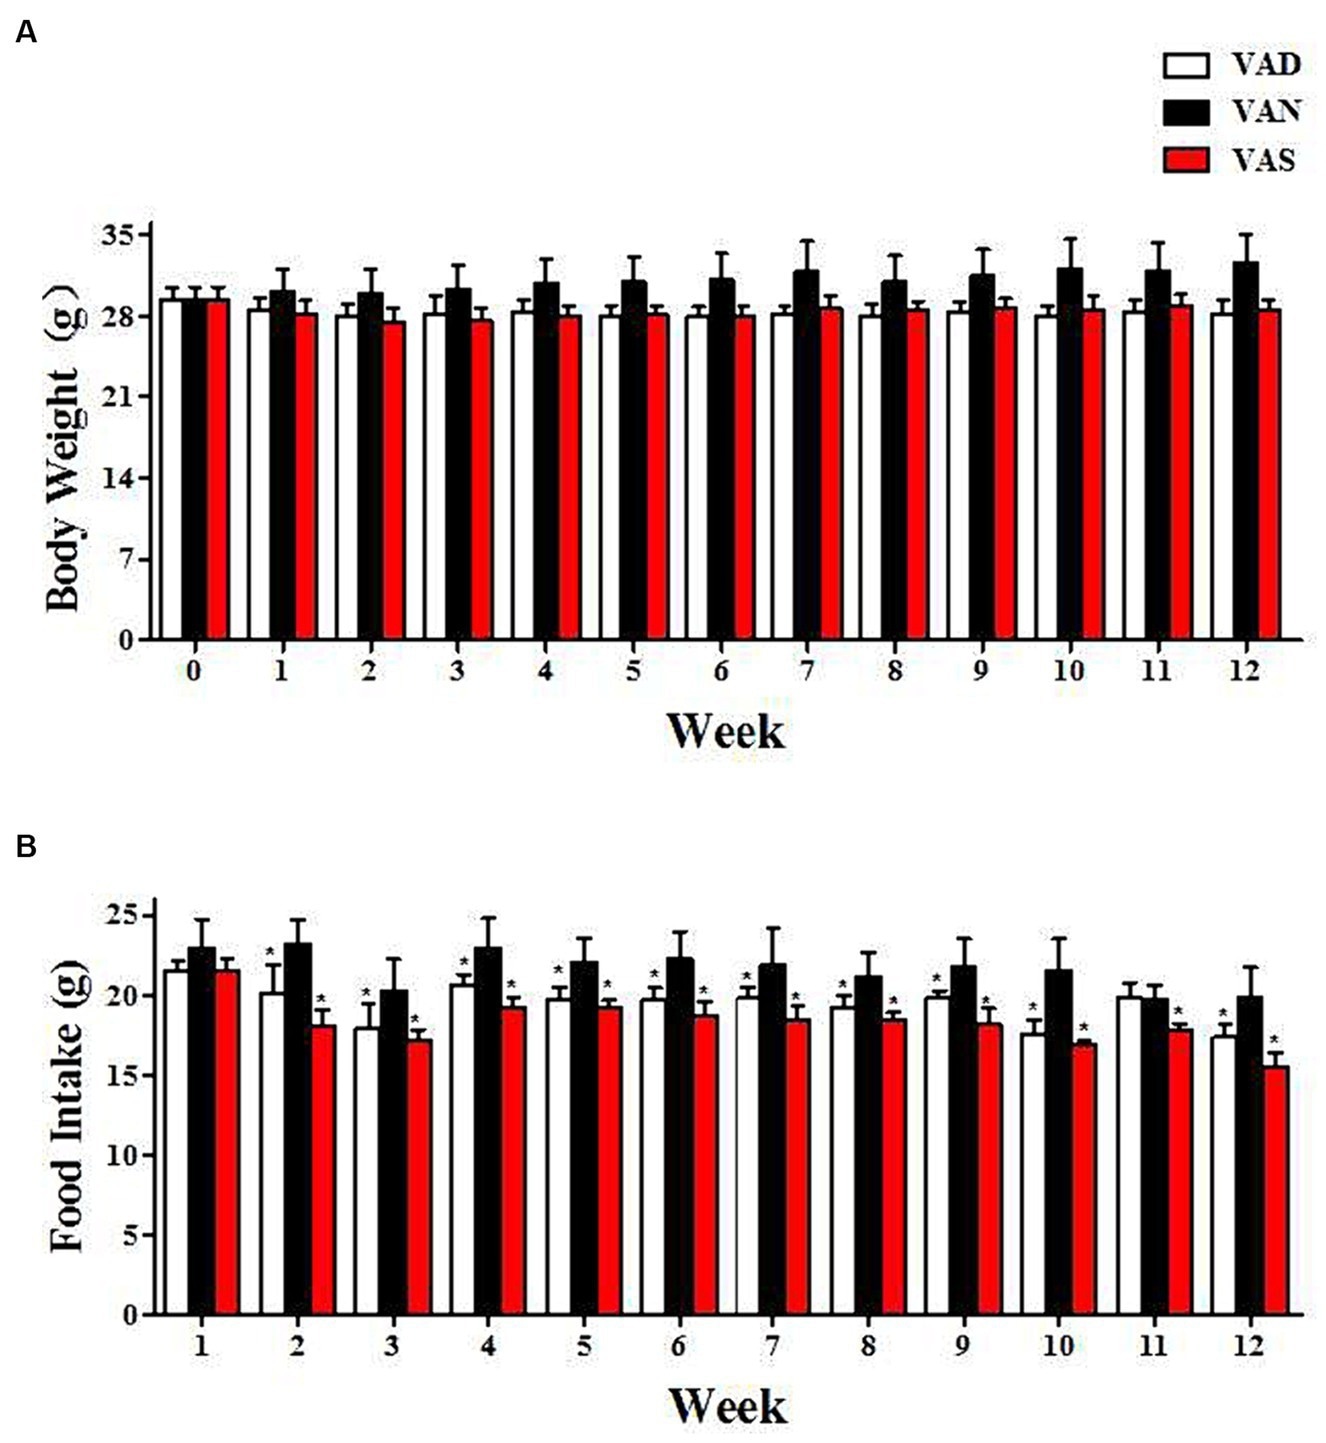 The impact of vitamin A on dietary intake and body weight changes in APP/PS1 mice. (A) The changes in body weight of APP/PS1 mice among different groups. (B) The changes in dietary vitamin A intake among different groups of APP/PS1 mice. *Indicates compared with the VAN group, p < 0.05 indicates statistical significance